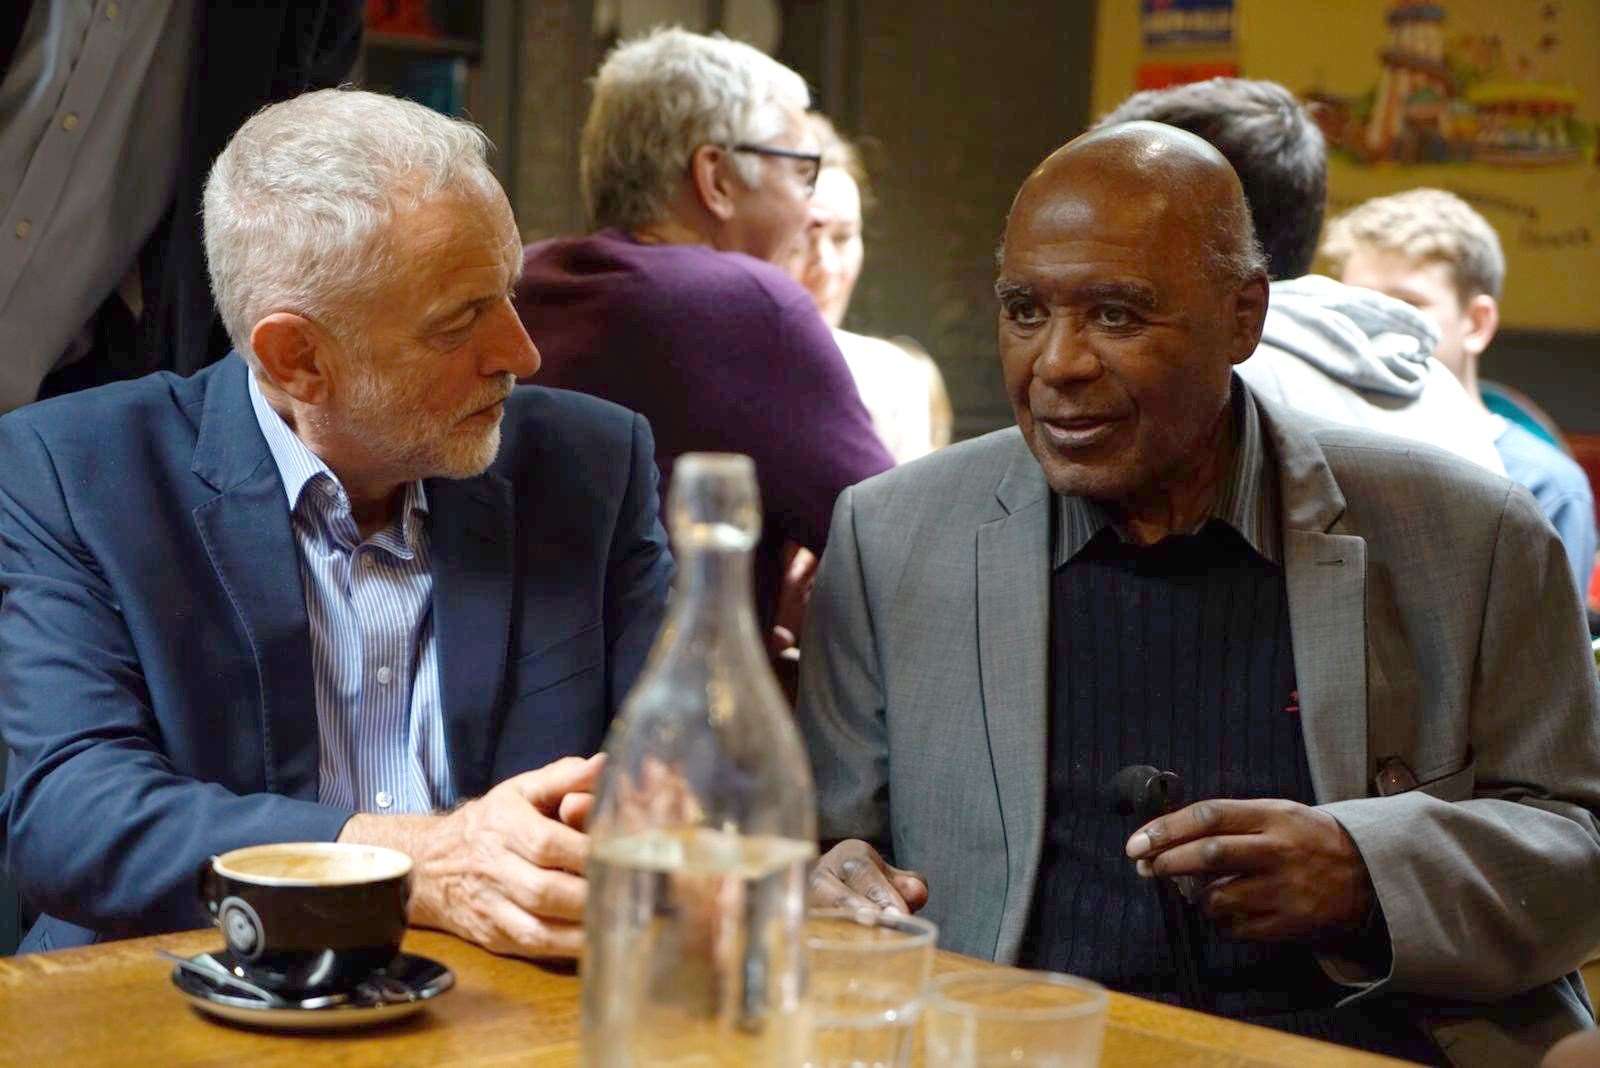 Then Labour leader Jeremy Corbyn meets Roy Hackett’s fellow civil rights activist Paul Stephenson during a visit to Bristol (Labour Party/PA)